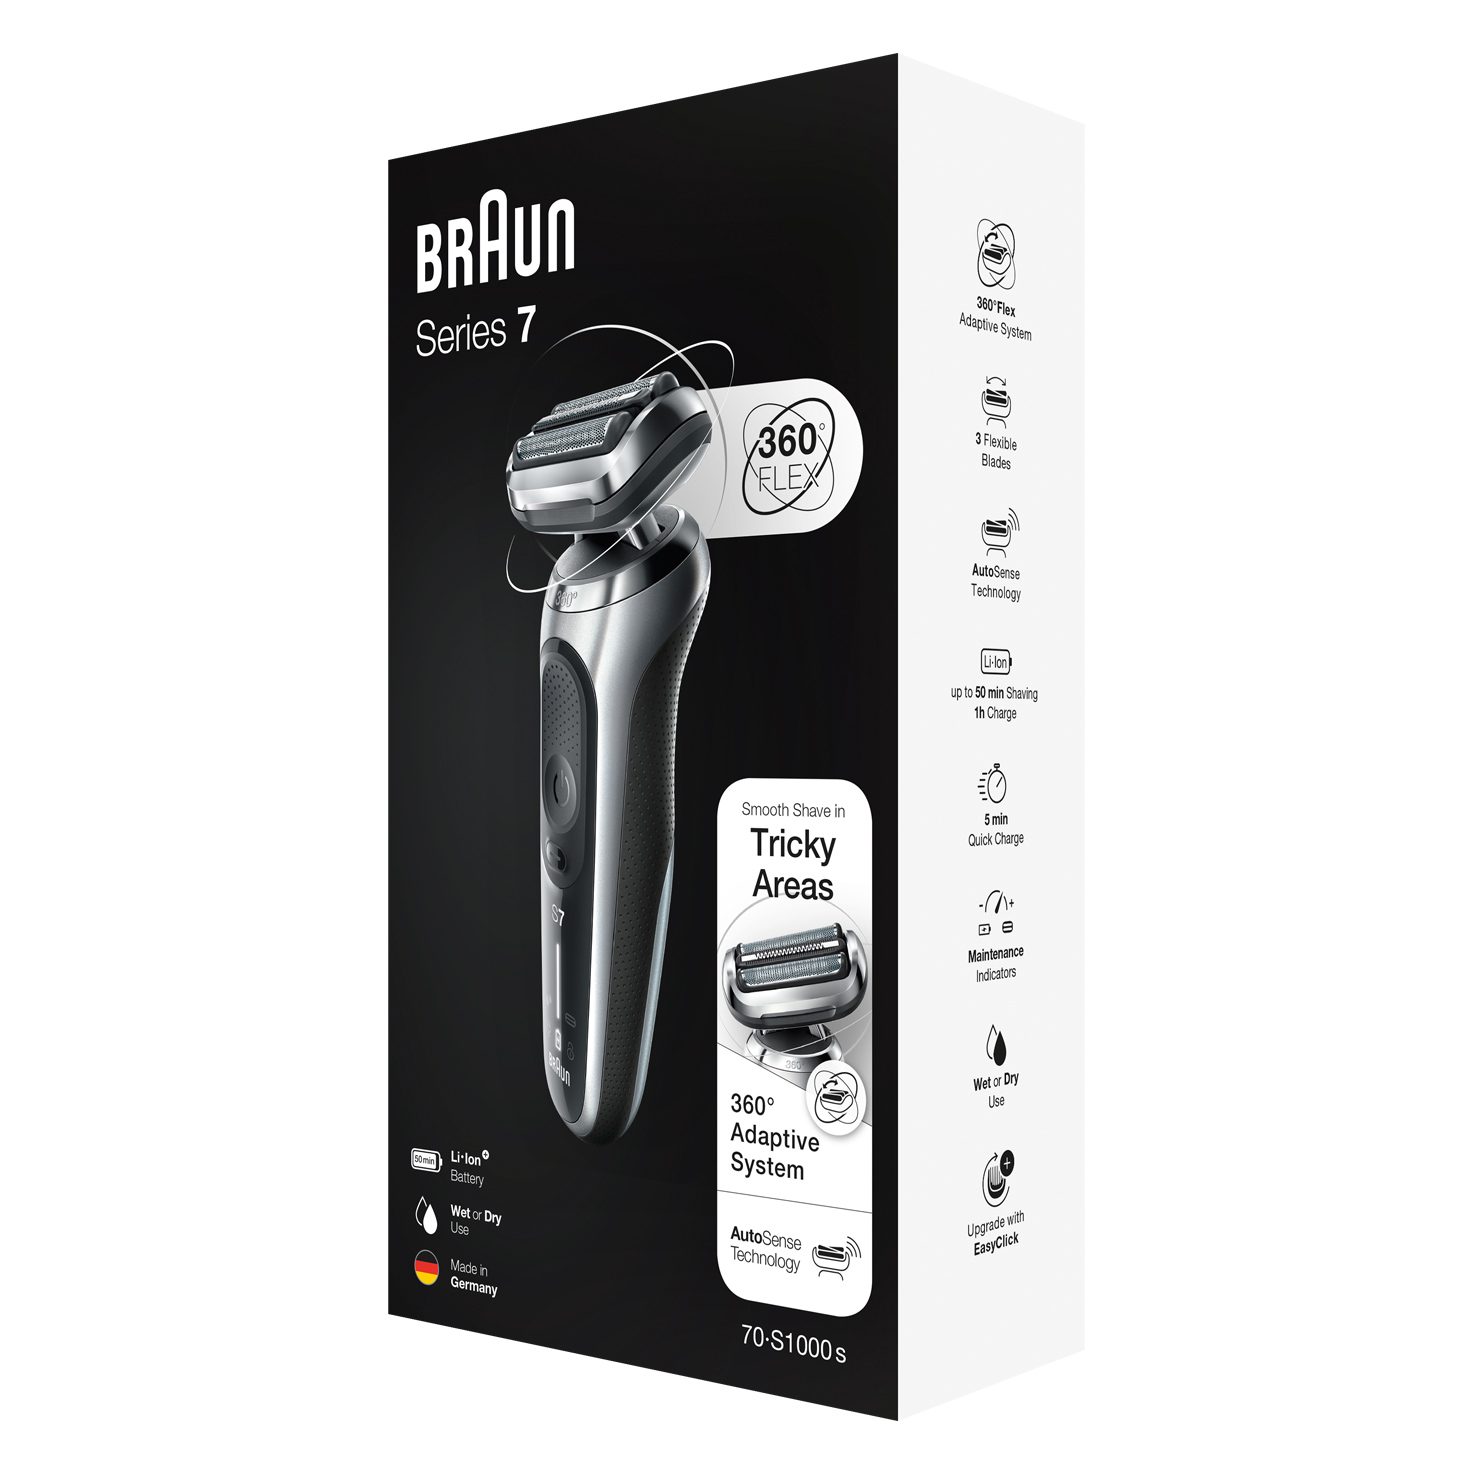 Braun Series 7 70-S1000s shaver - packaging